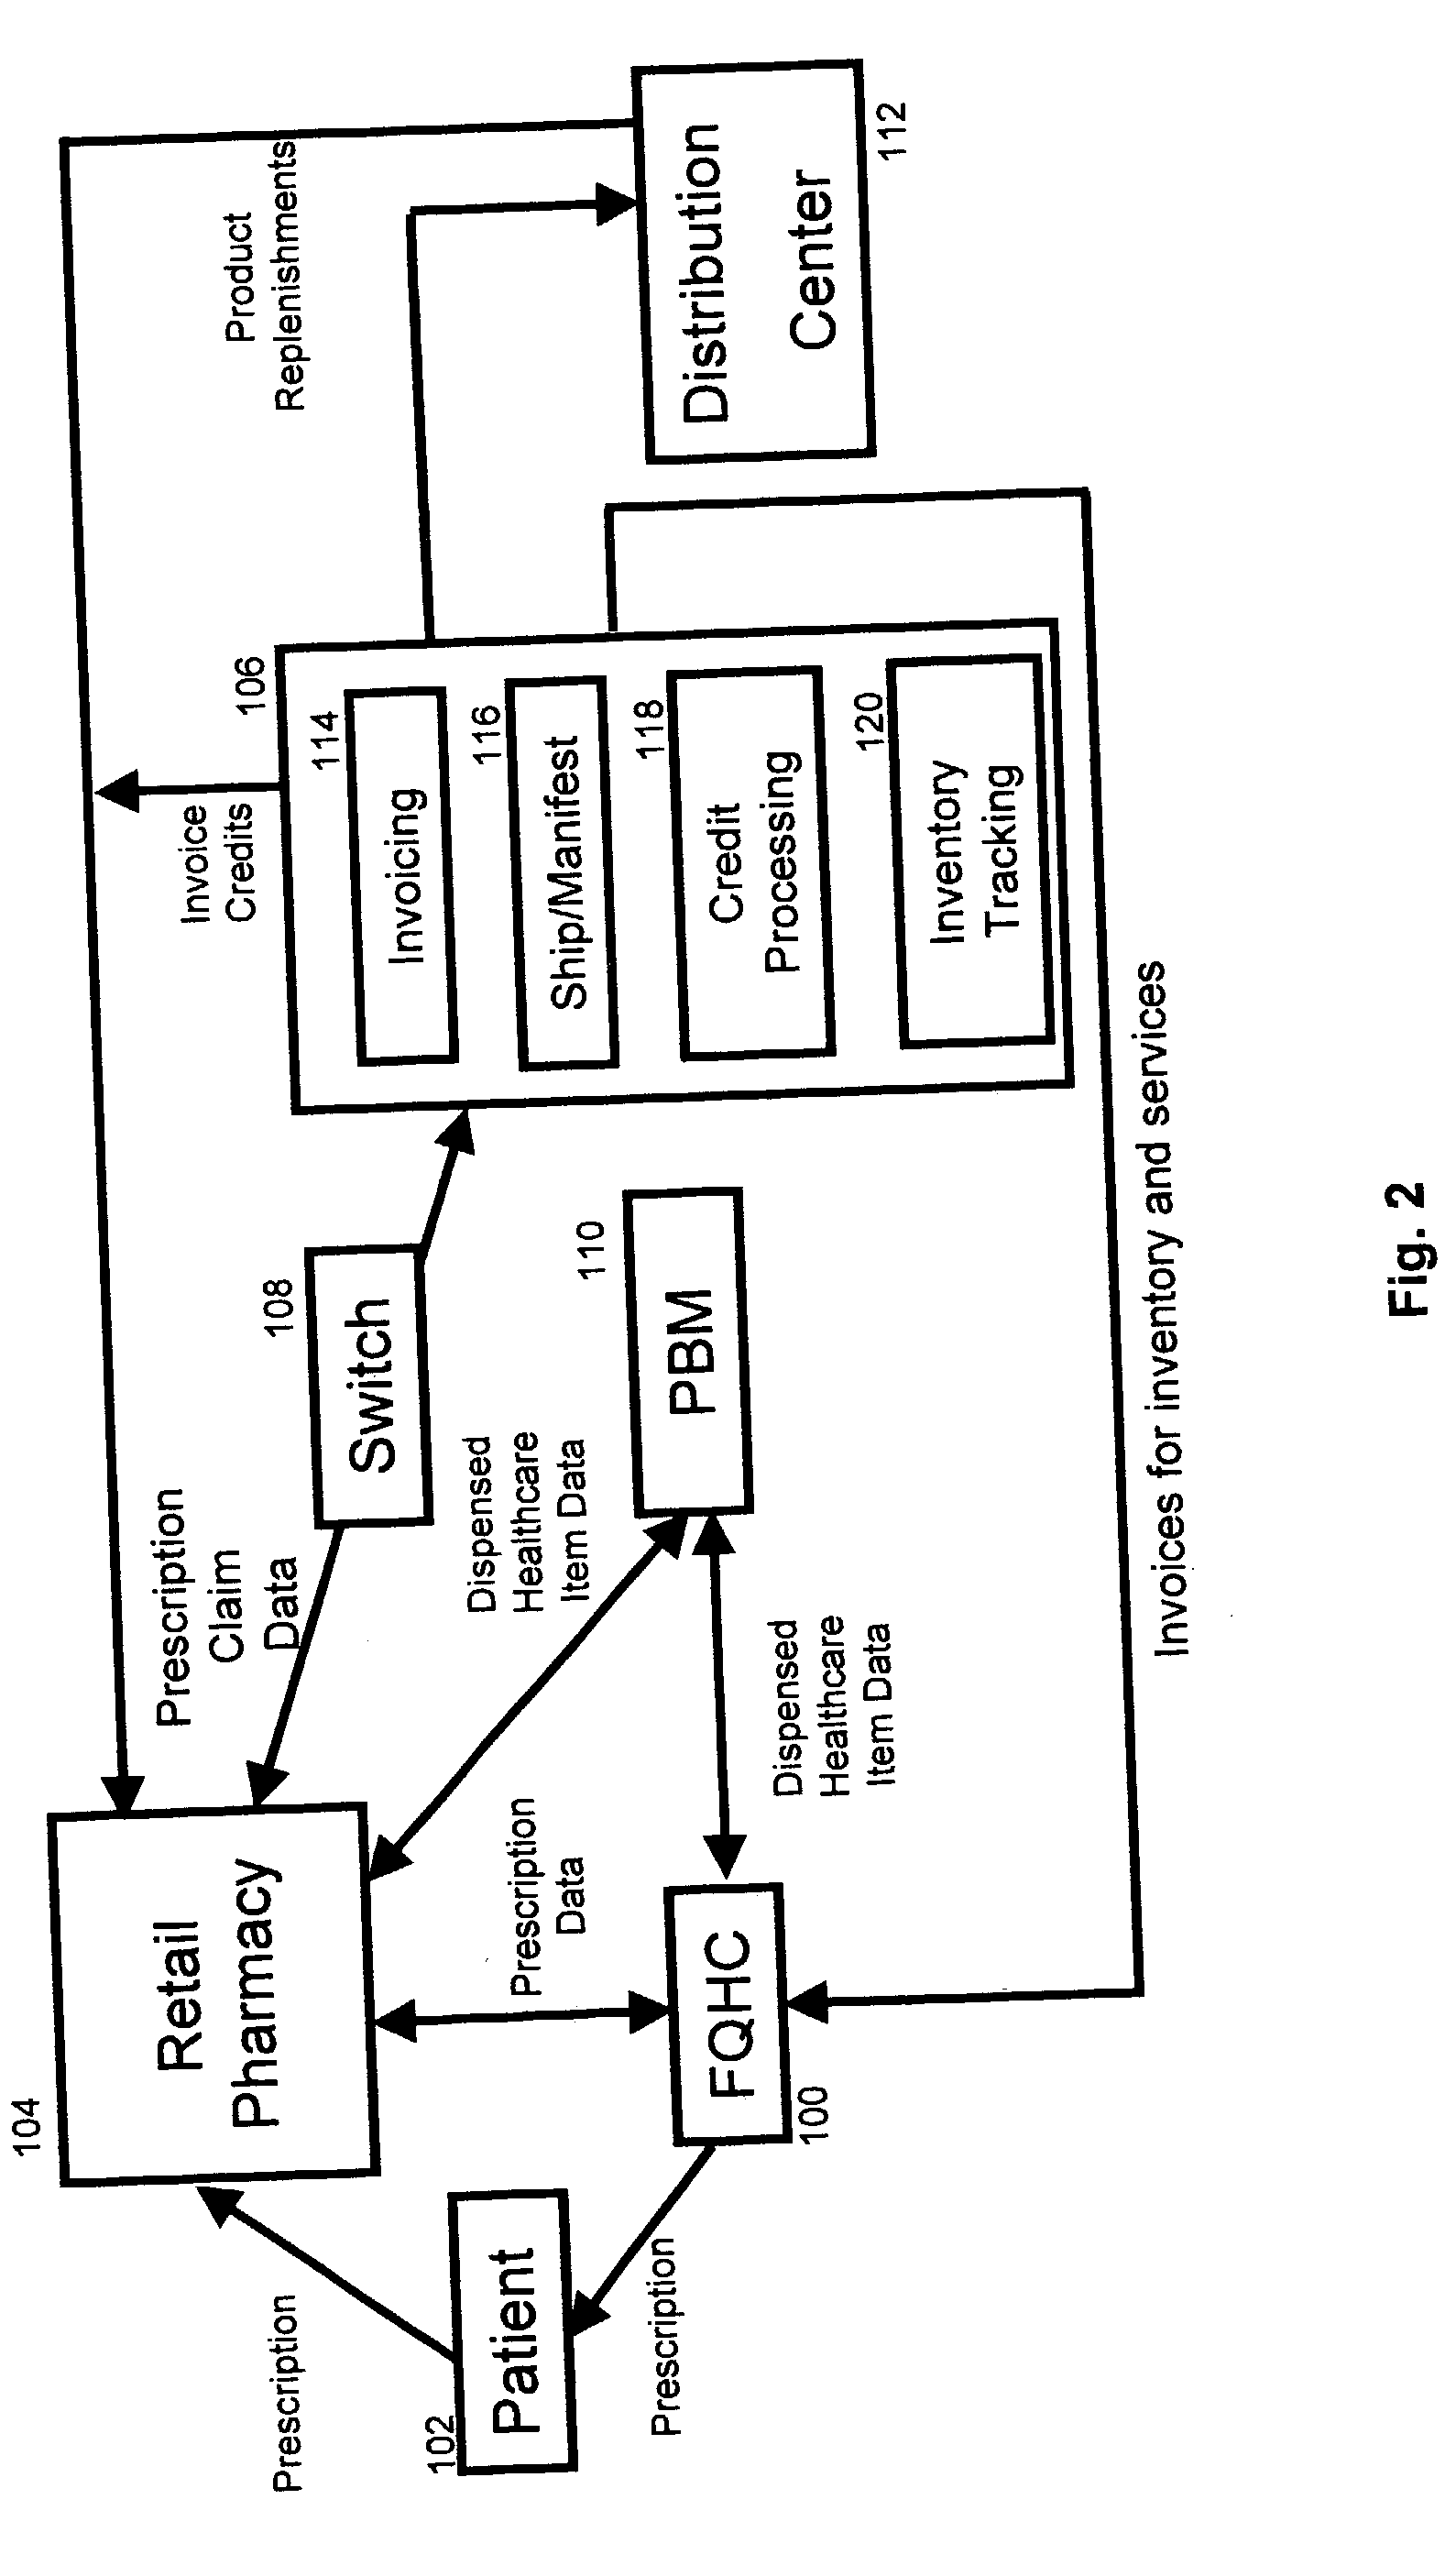 System and method for distributing healthcare products